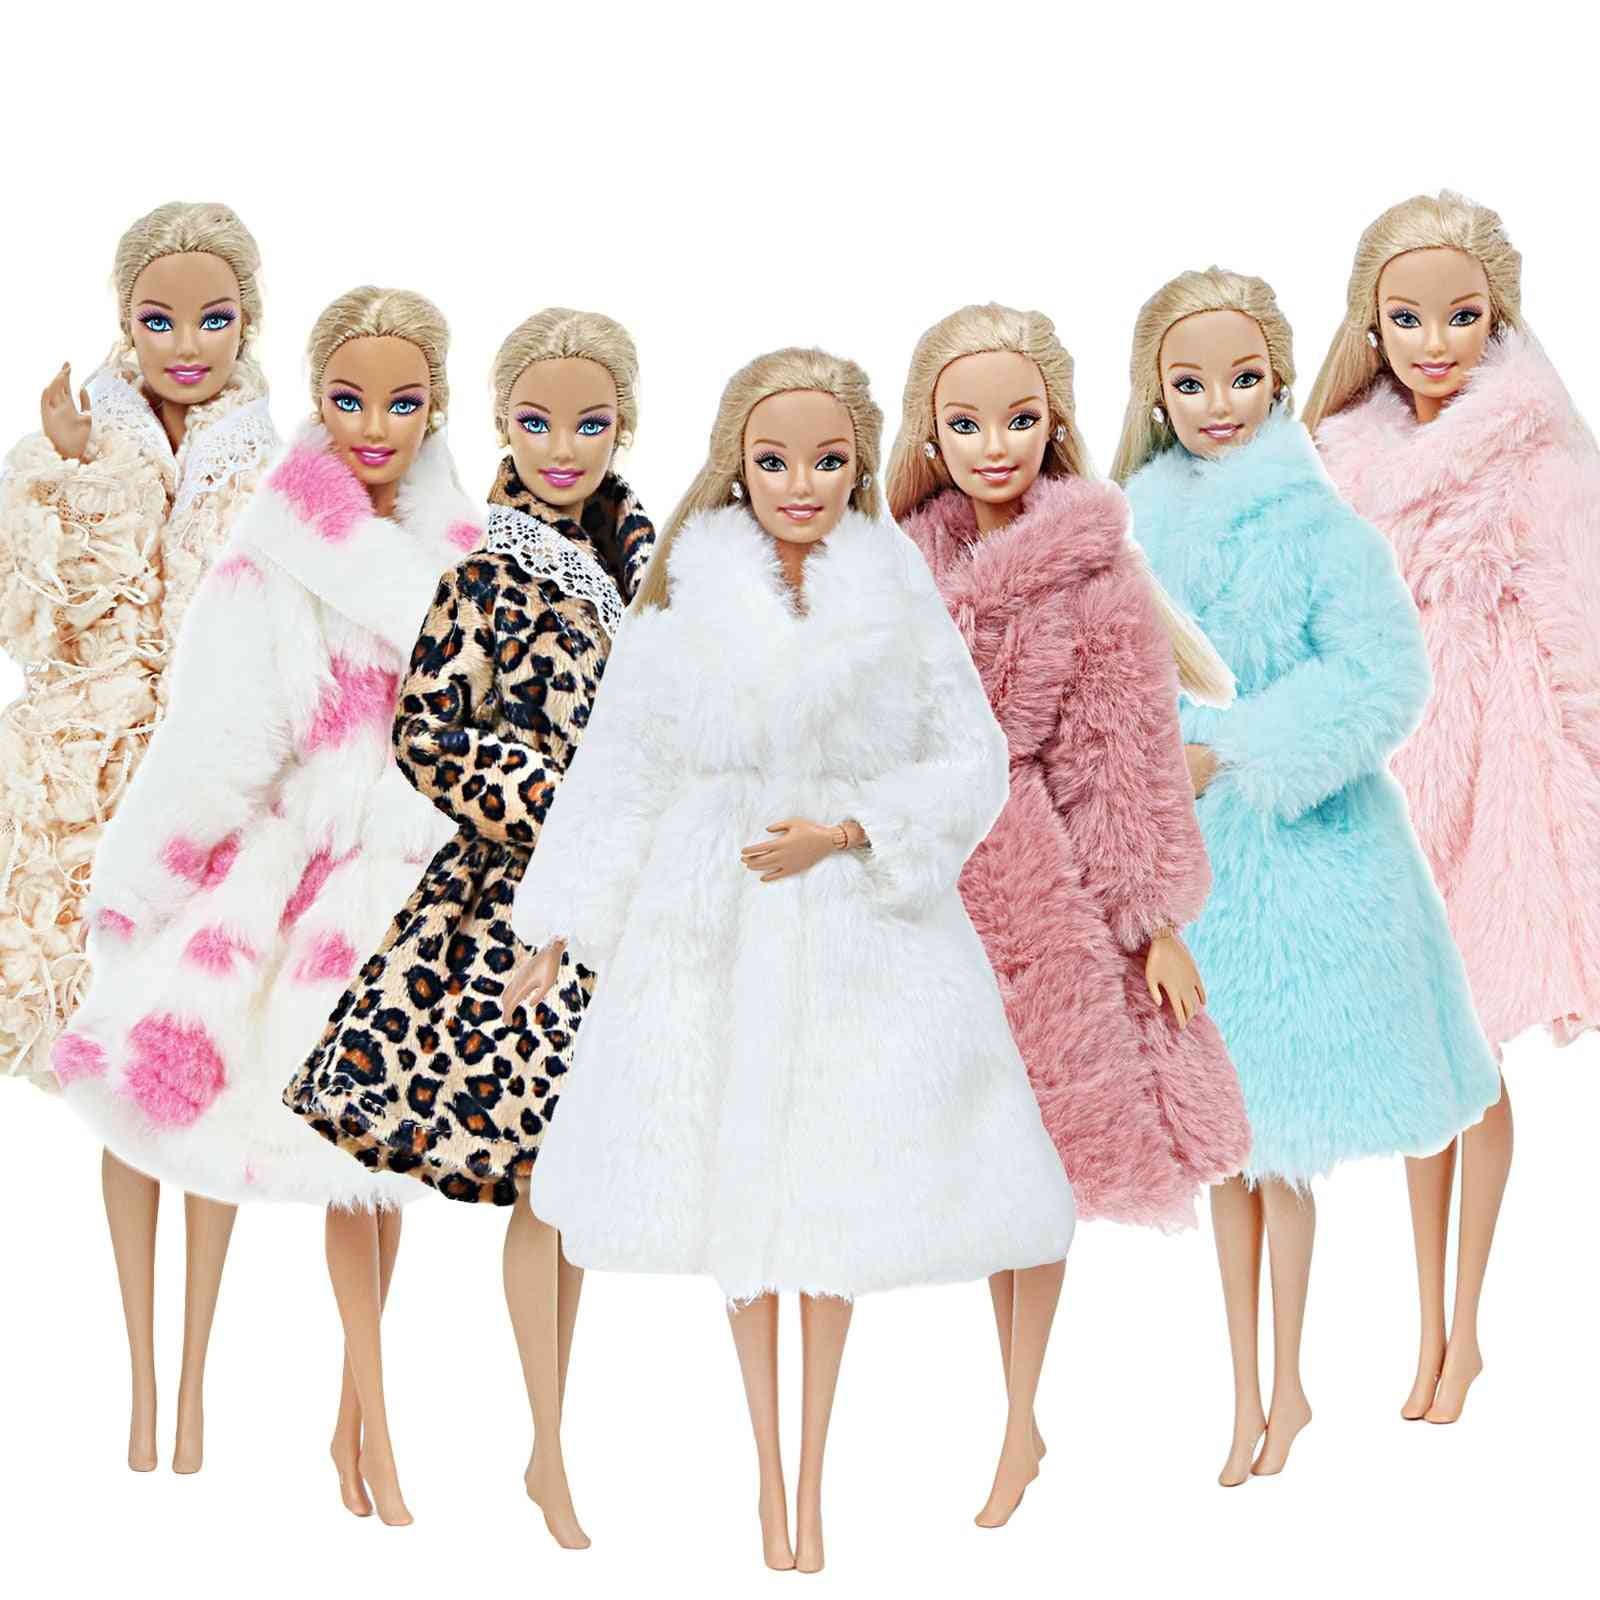 Handmade, High Quality Fur Coat Dress For Barbie Doll - Winter Wear Outfit